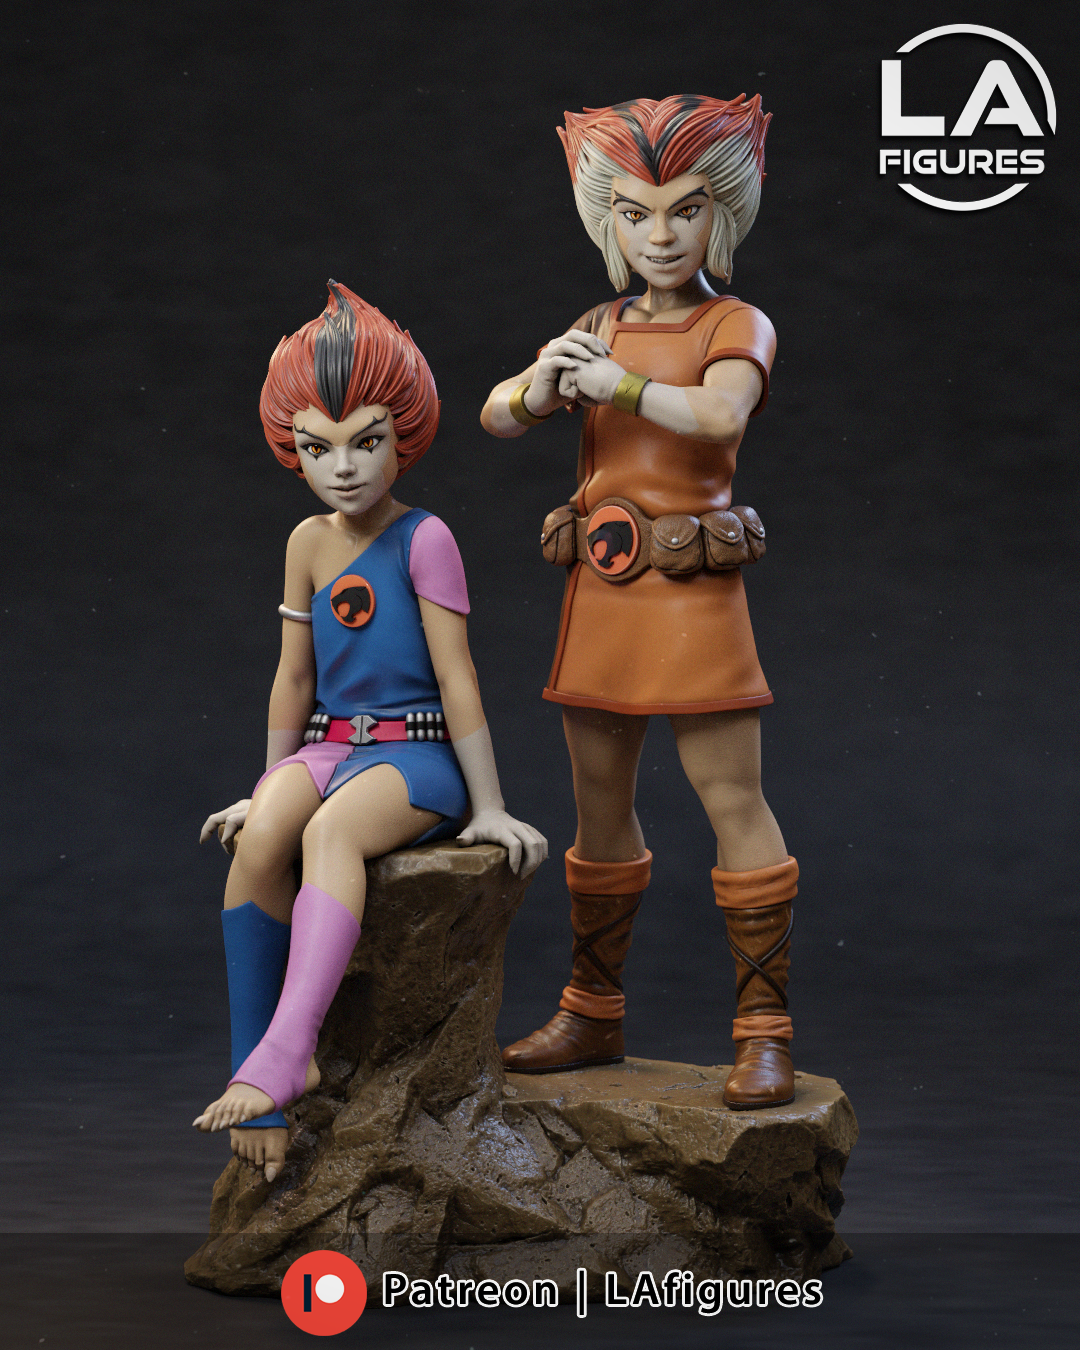 WILLY KIT WILLY KAT- THUNDERCATS - L.A FIGURES